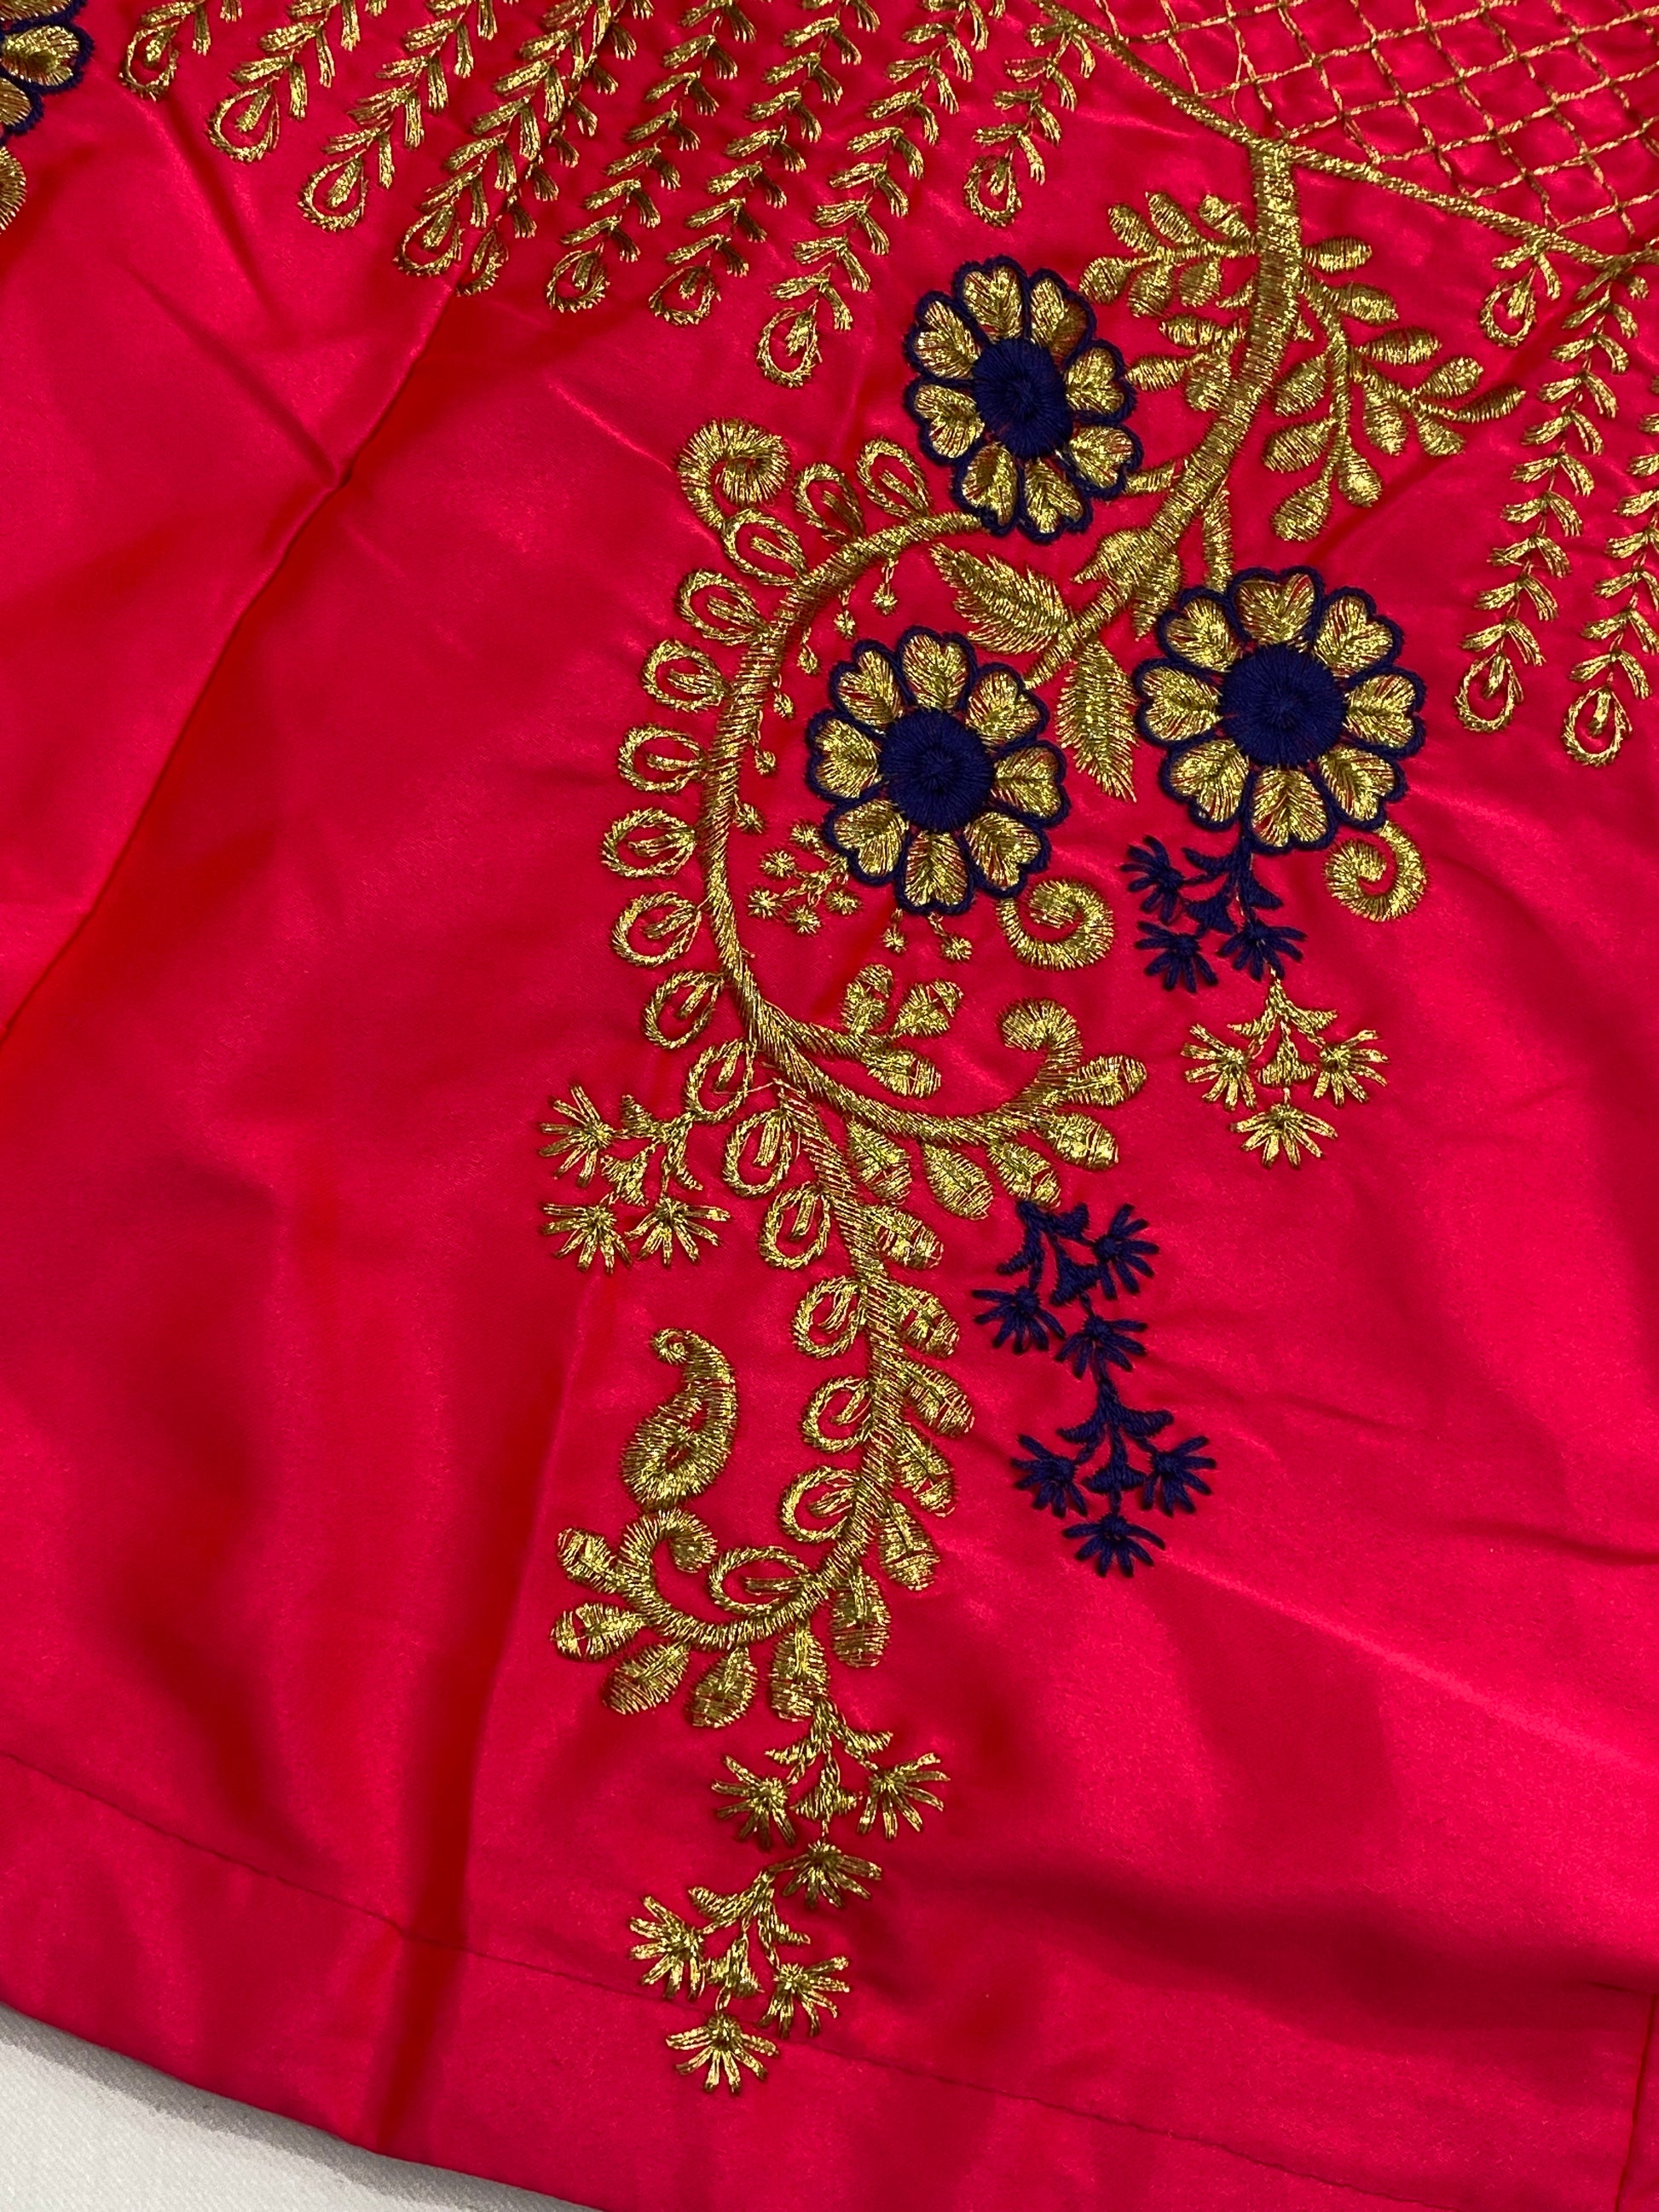 Appealing Pink Color Heavy Embroidery Work Lehenga Choli in USA